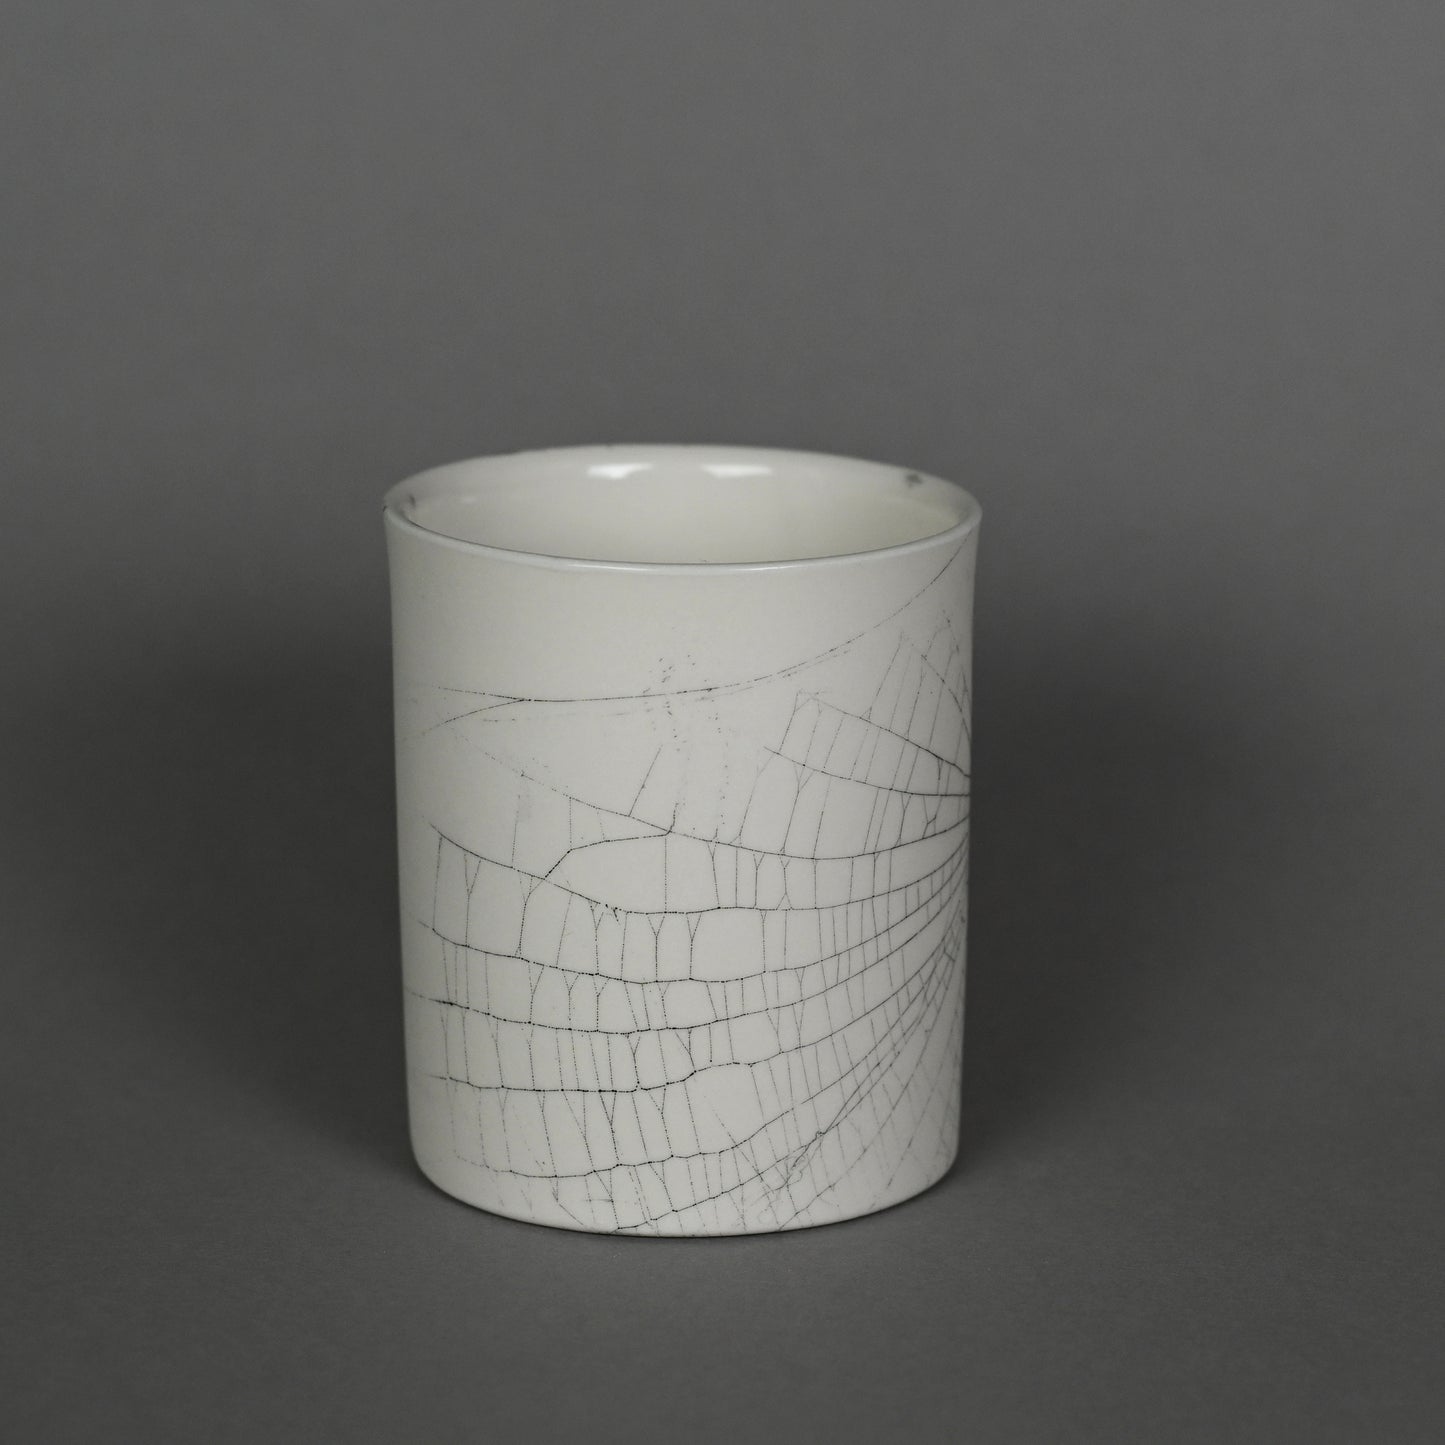 Web on Clay (213), Collected September 25, 2022